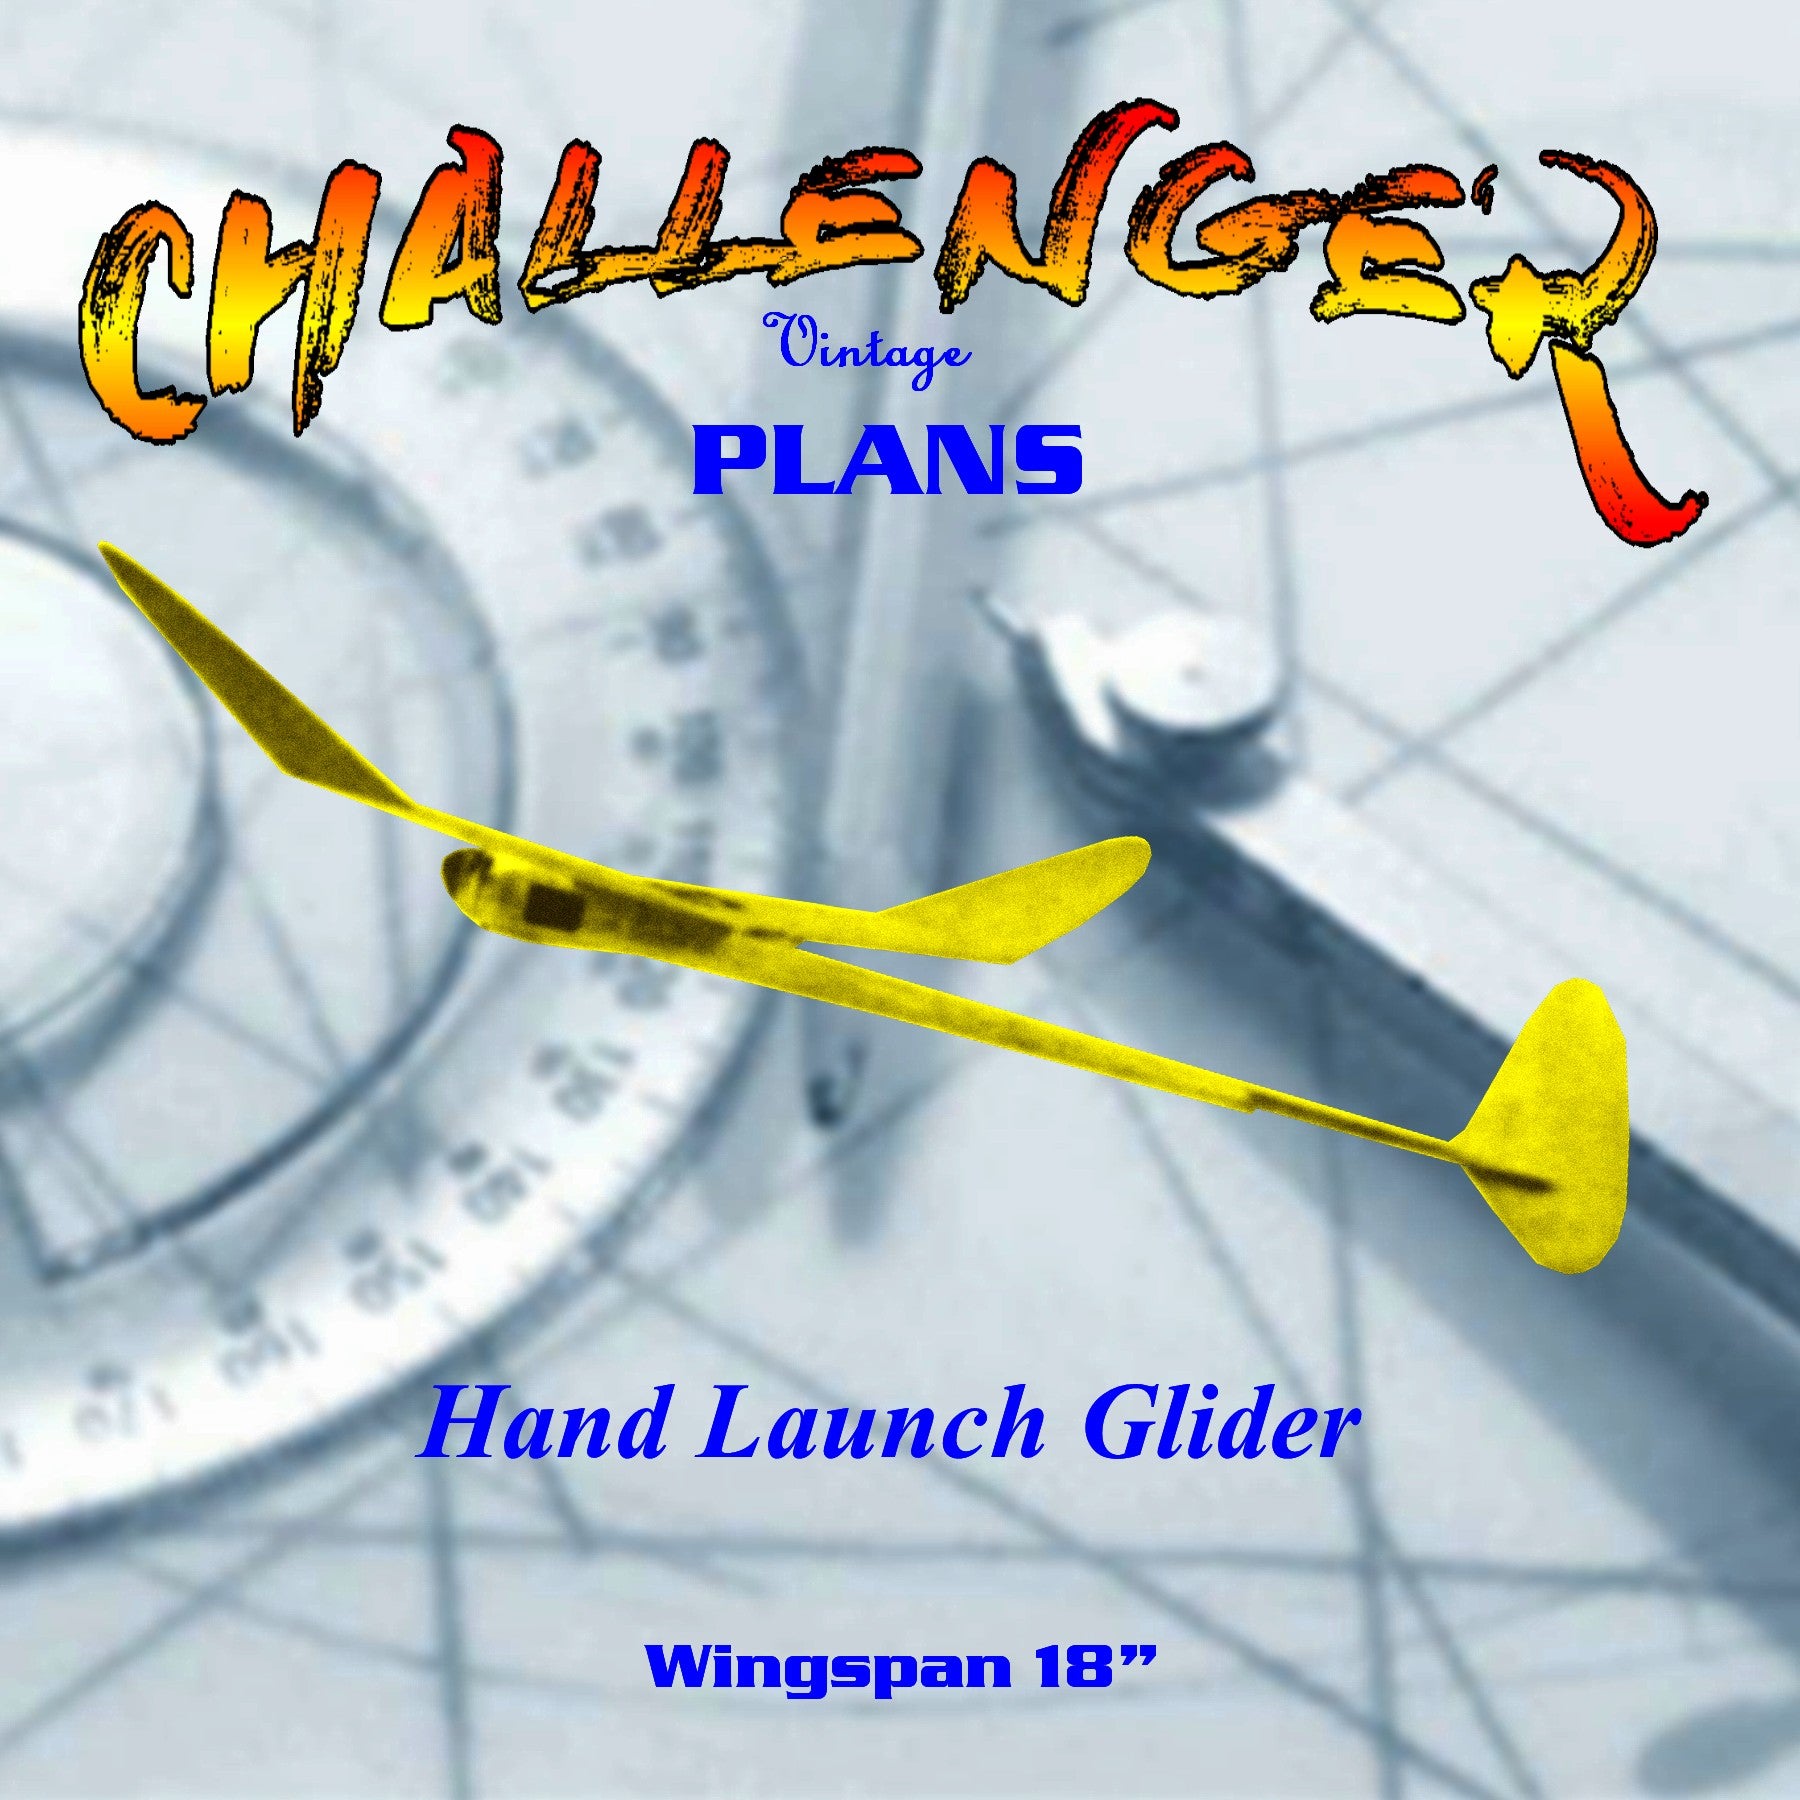 full size printed plan outdoor hand launch glider wingspan 18" challenger